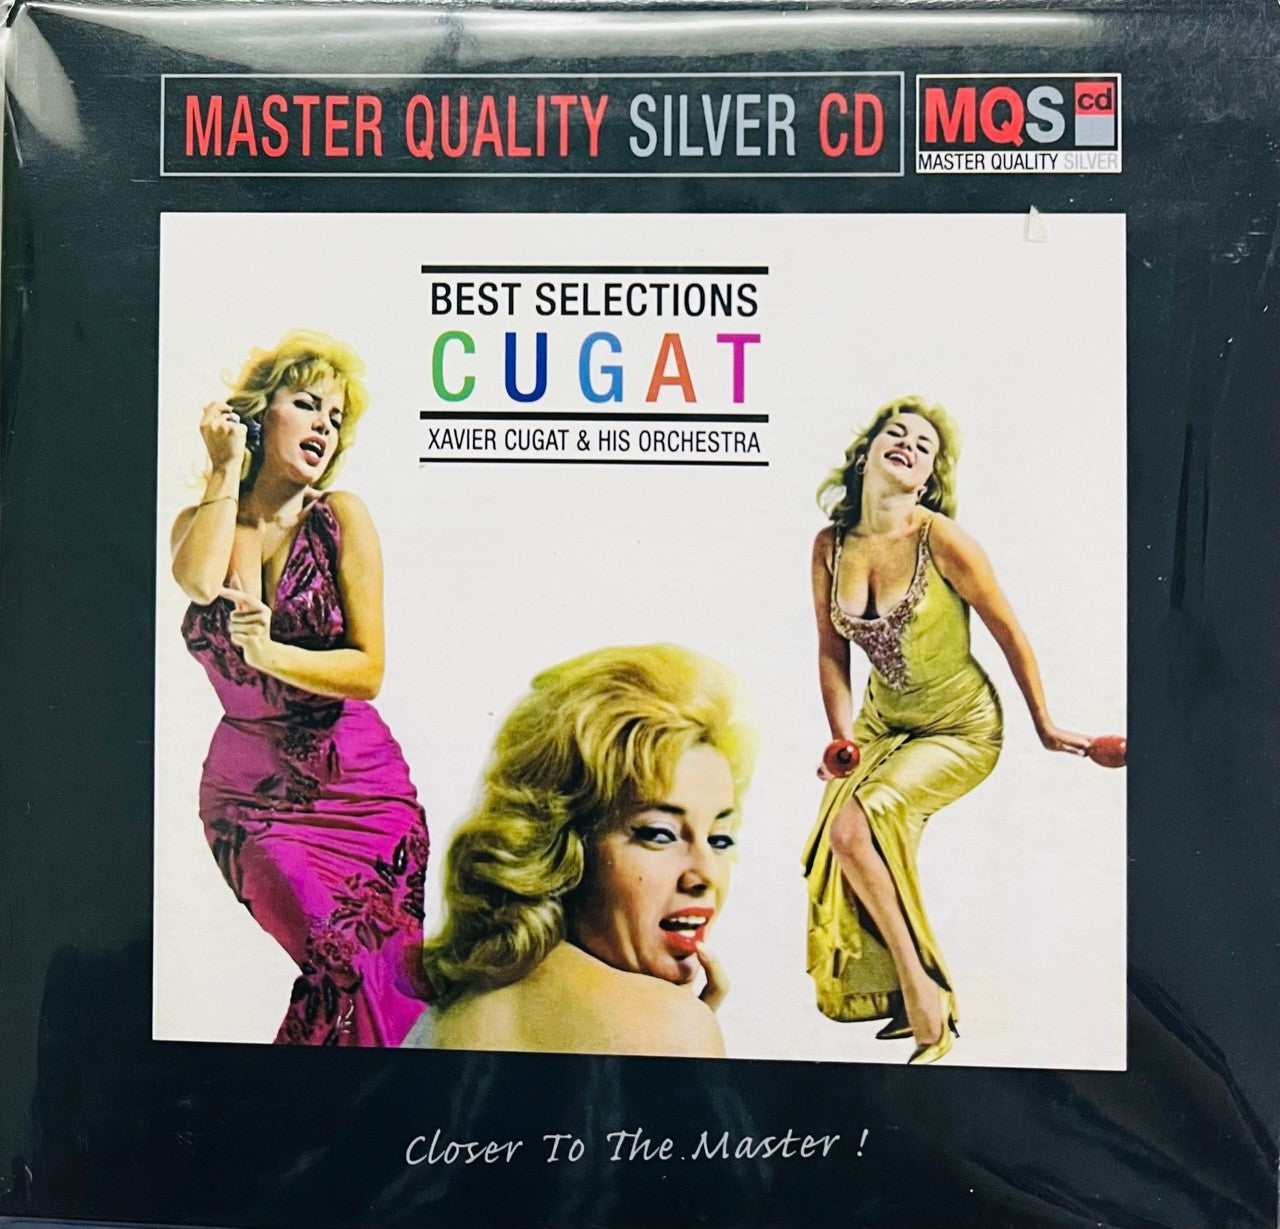 XAVIER CUGAT & HIS ORCHESTRA - CUGAT BEST SELECTIONS (MQS SILVER) CD